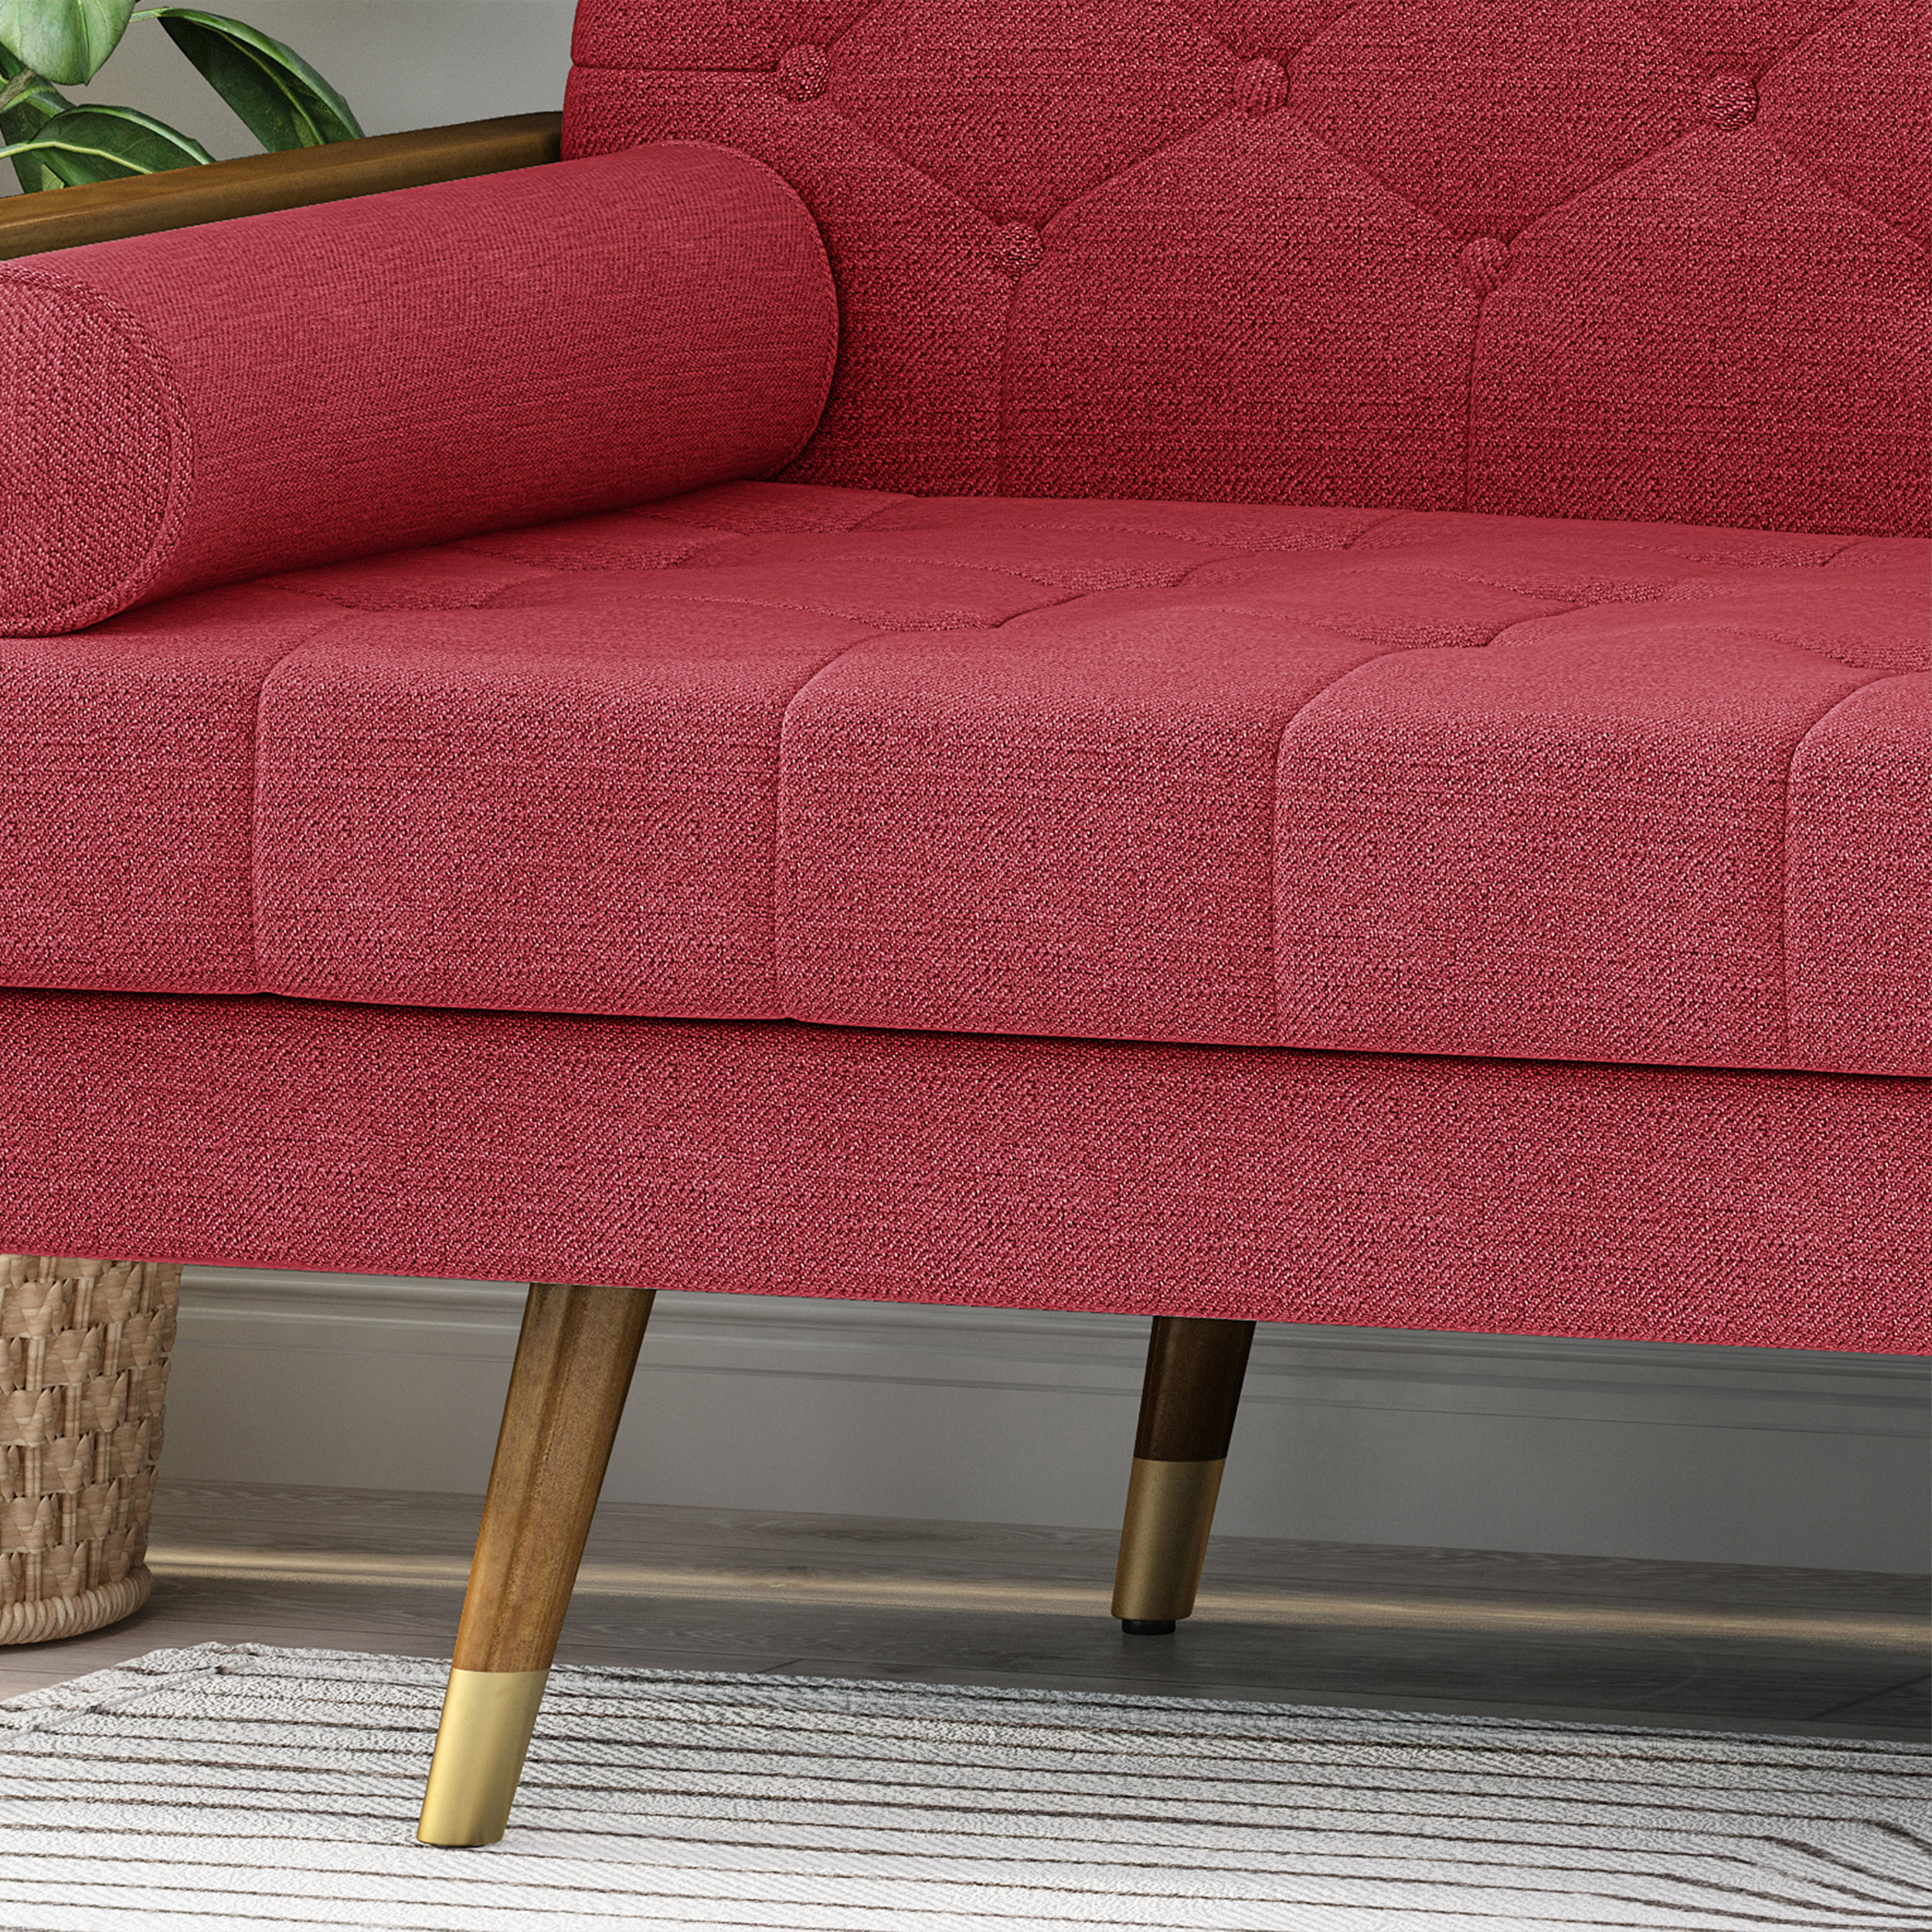 Demuir Mid Century Modern Tufted Fabric Sofa with Rolled Accent Pillows, Red - image 3 of 10